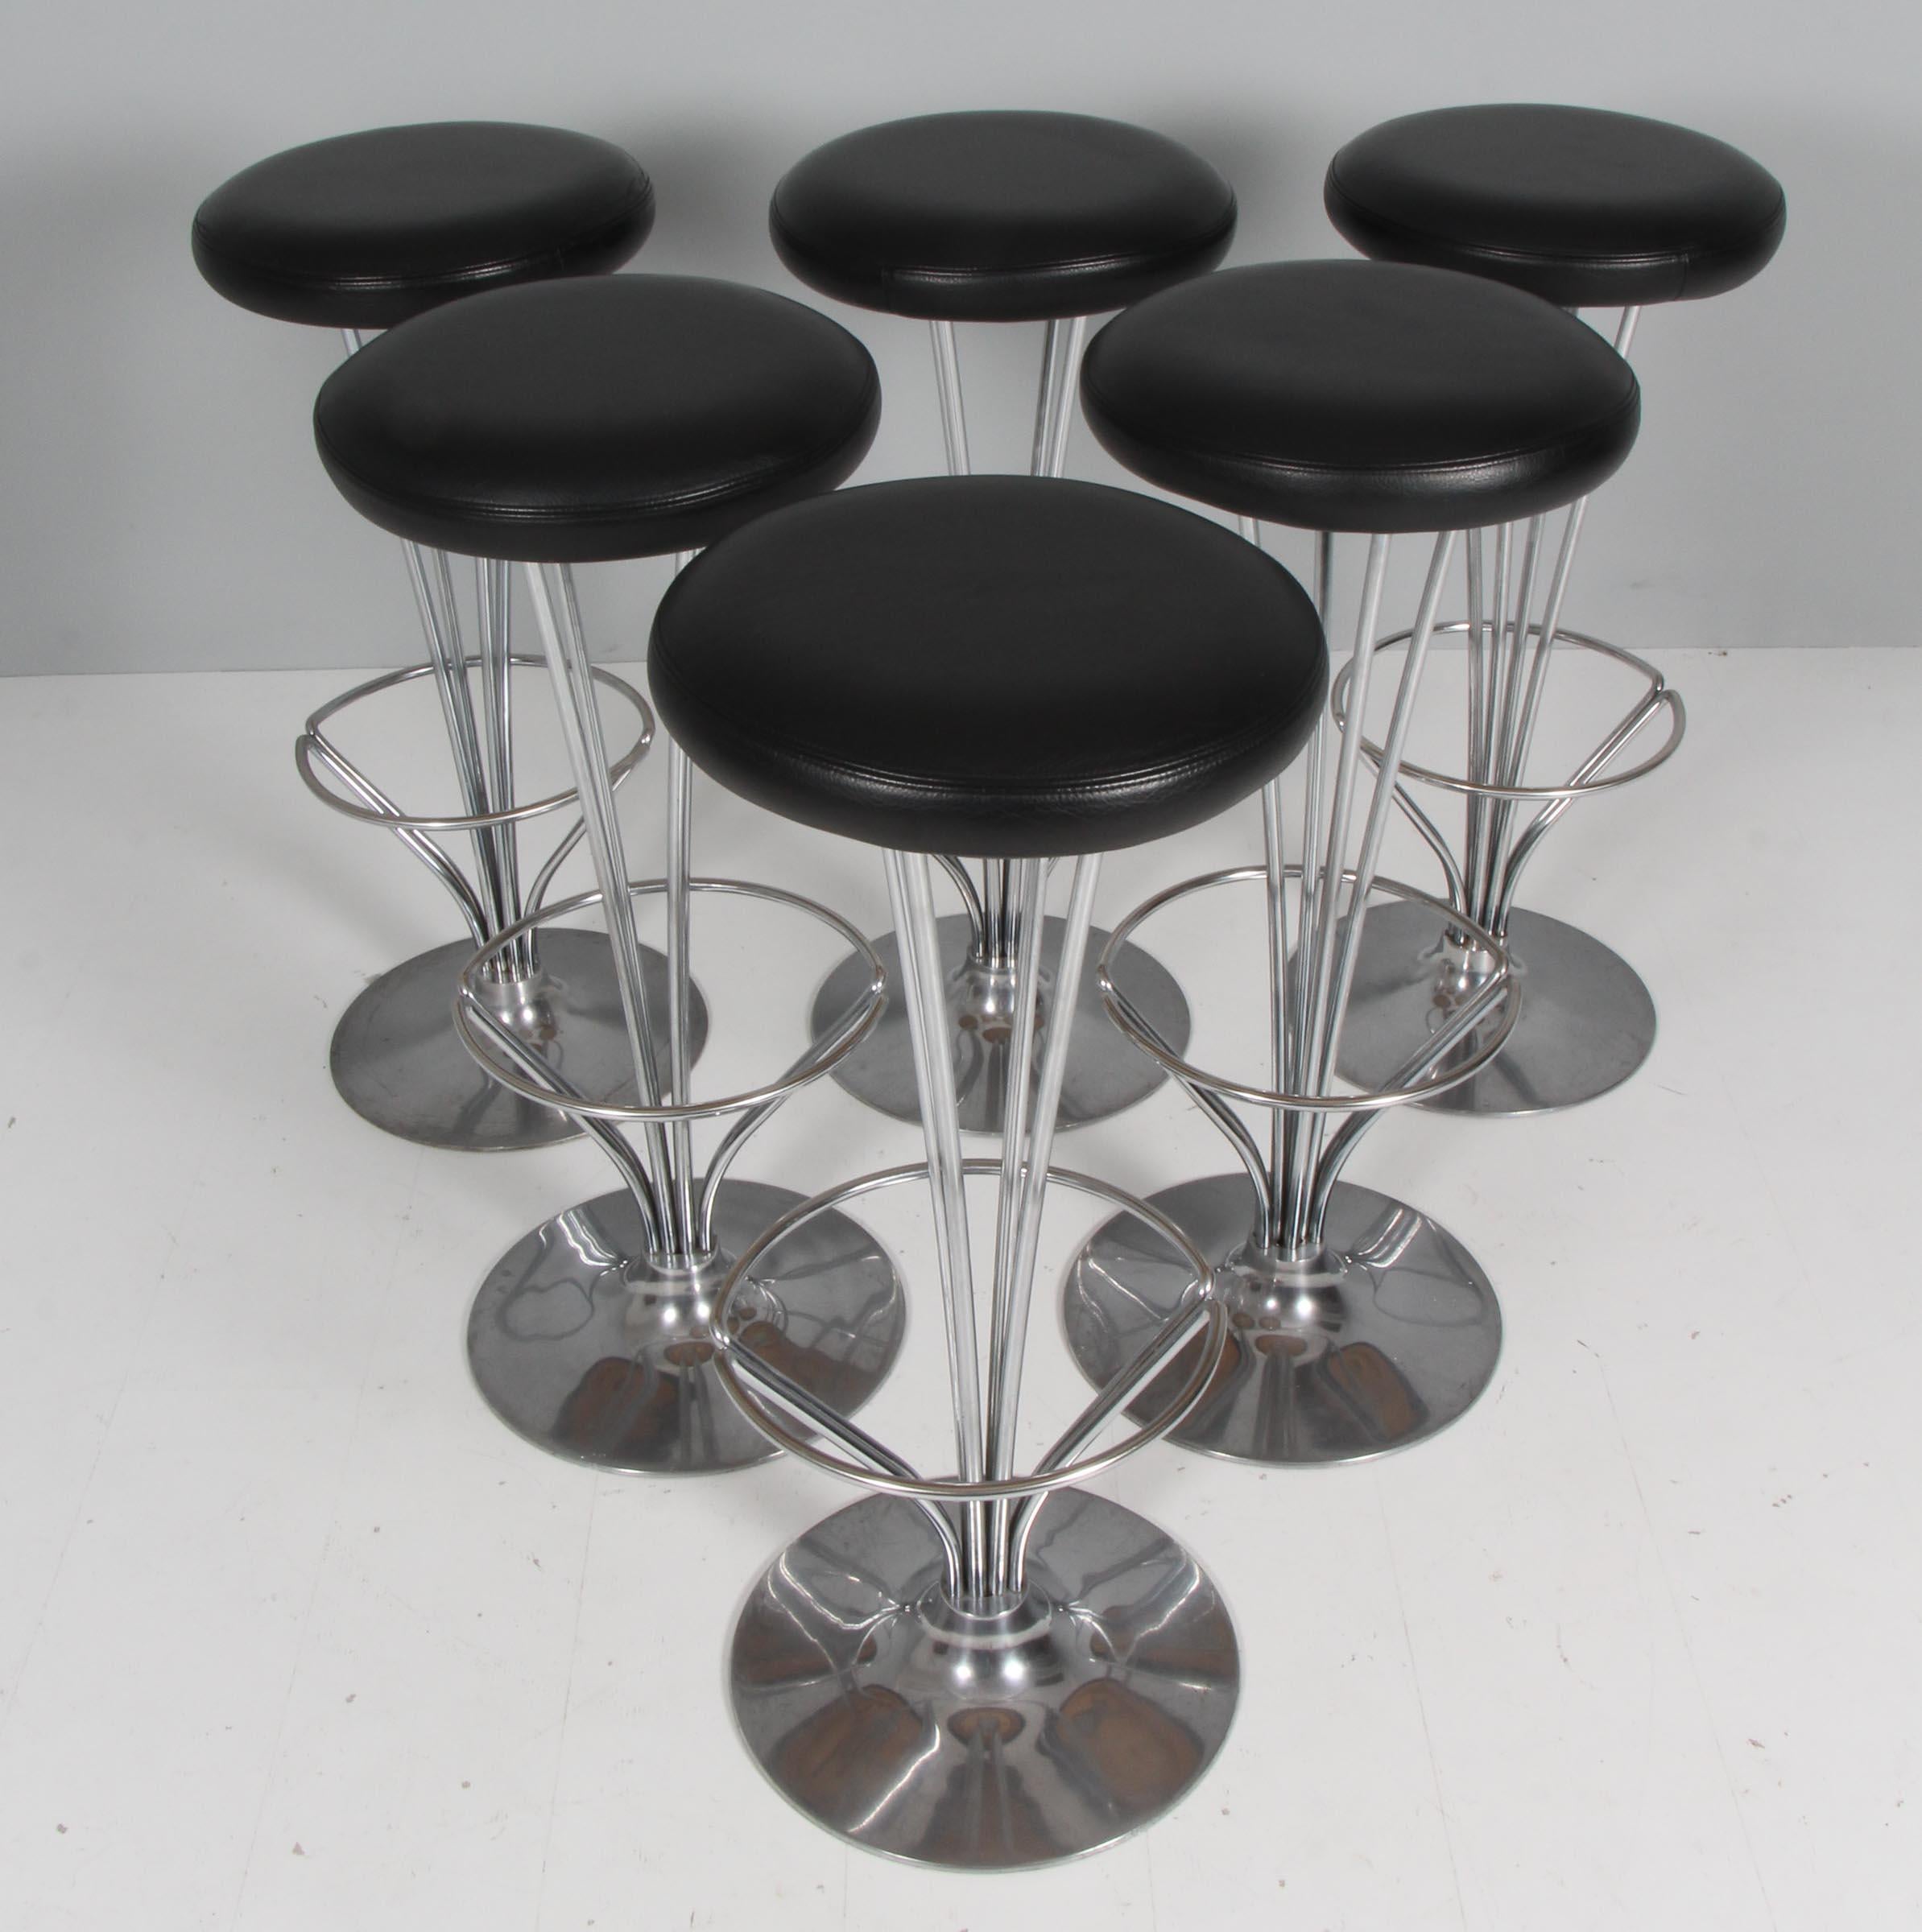 Piet Hein bar stools original upholstered with black leather.

Made by Fritz Hansen.